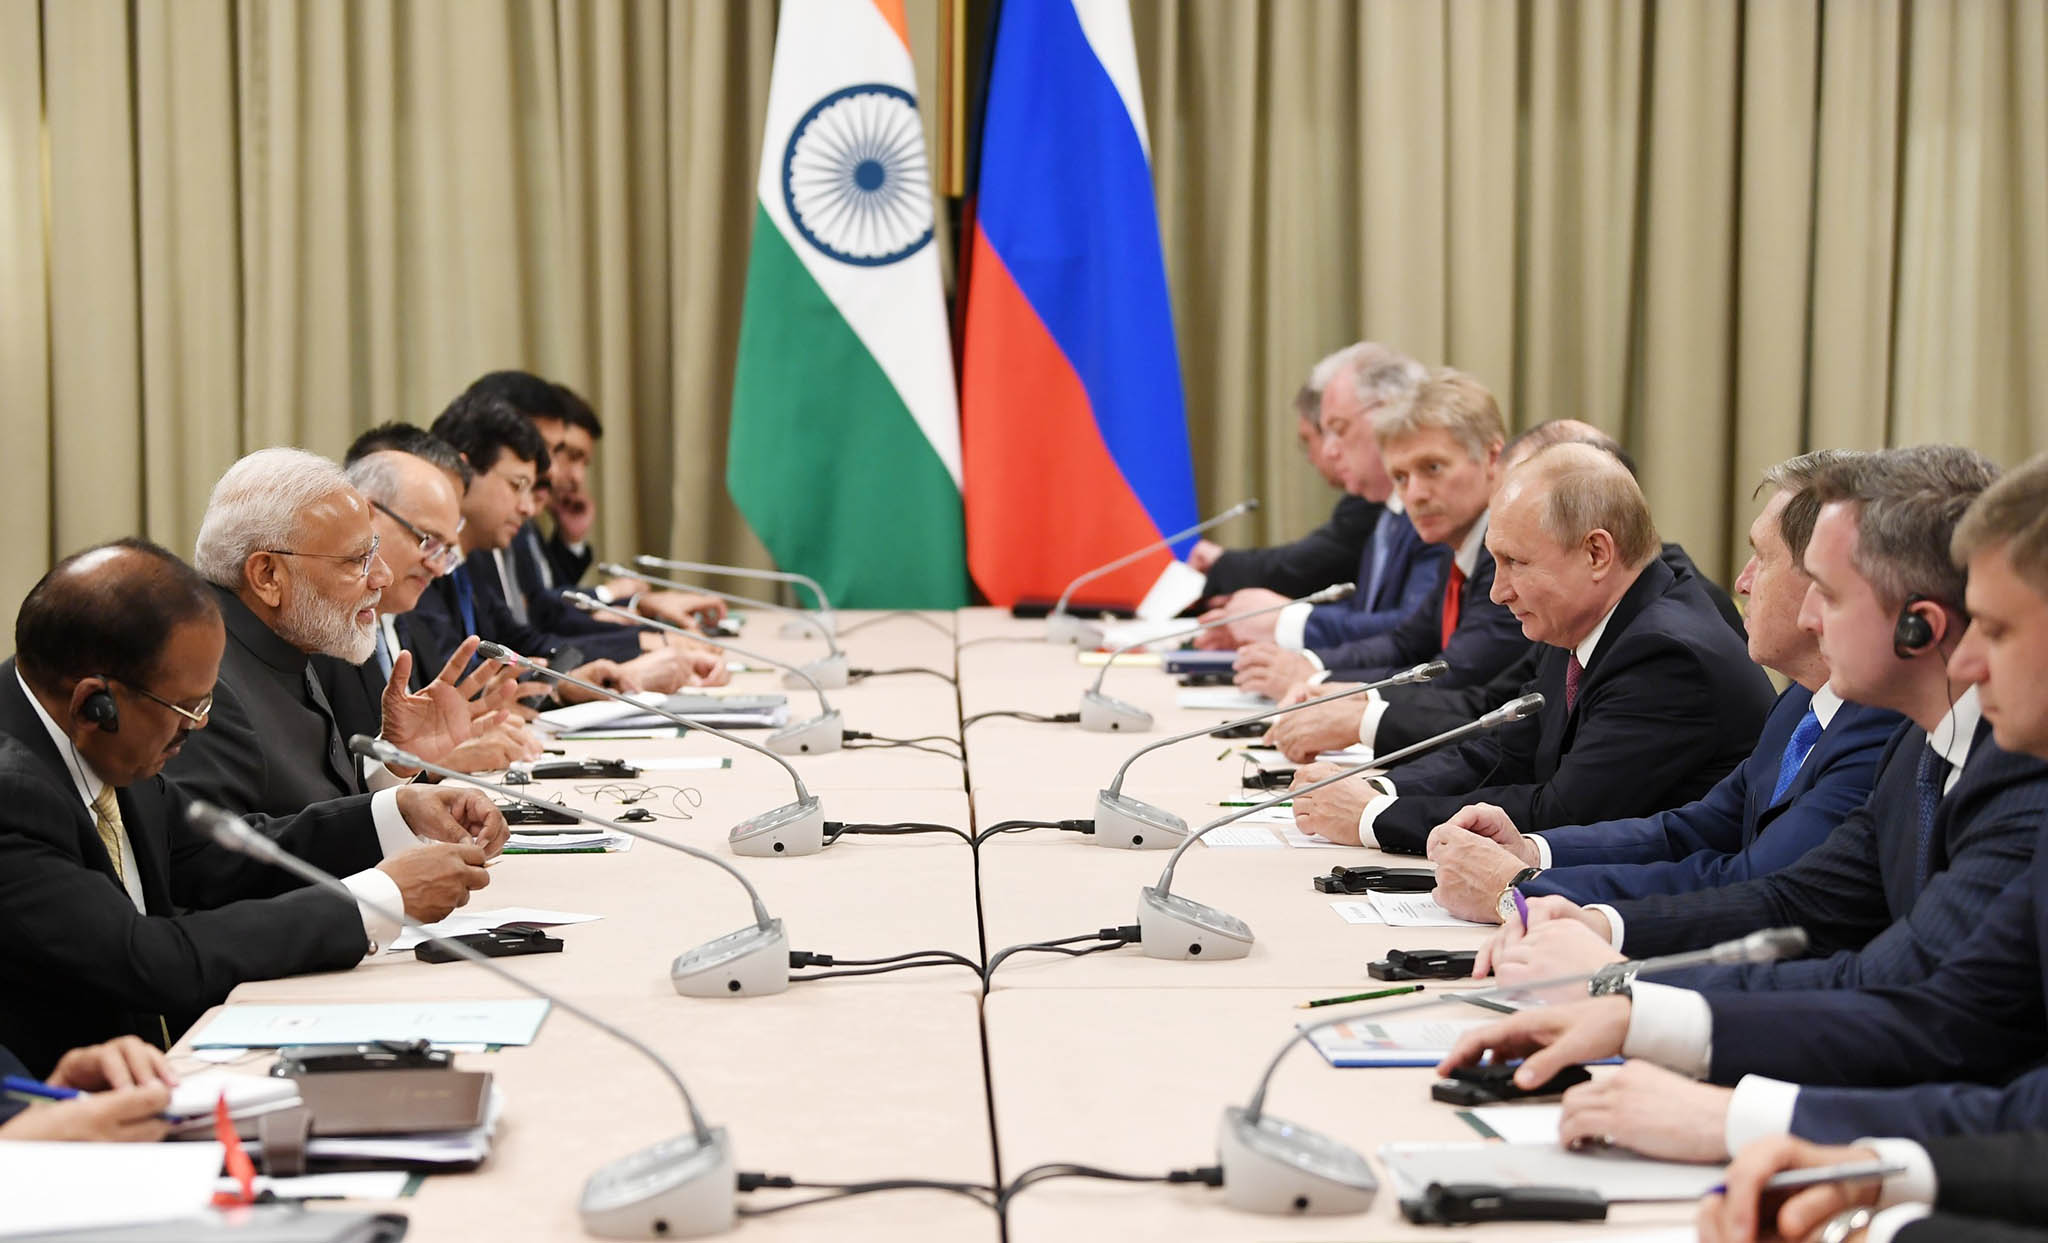 Indian Prime Minister Narendra Modi meets Russian President Vladimir Putin on the sidelines of Shanghai Cooperation Organization Summit in Bishkek, Kyrgyzstan. June 13, 2019 (Indian Ministry of Foreign Affairs/Flickr)